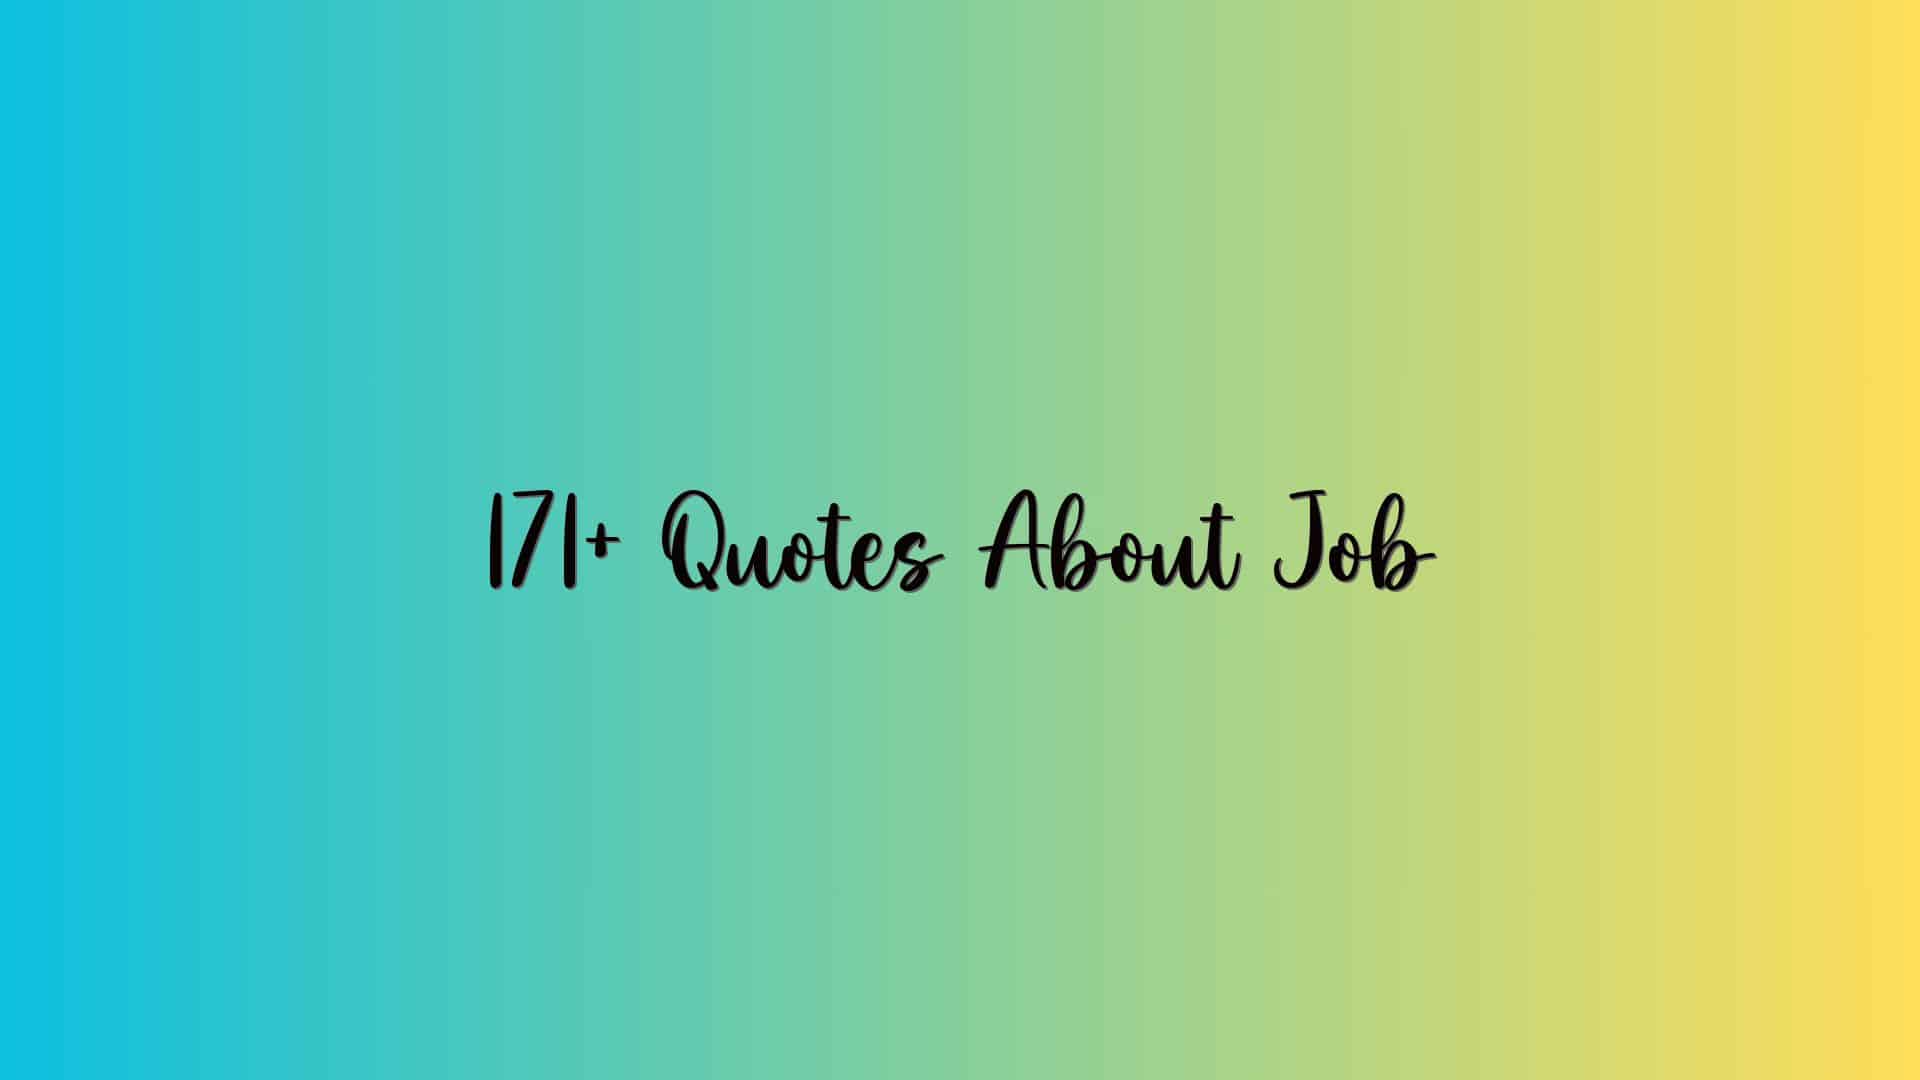 171+ Quotes About Job